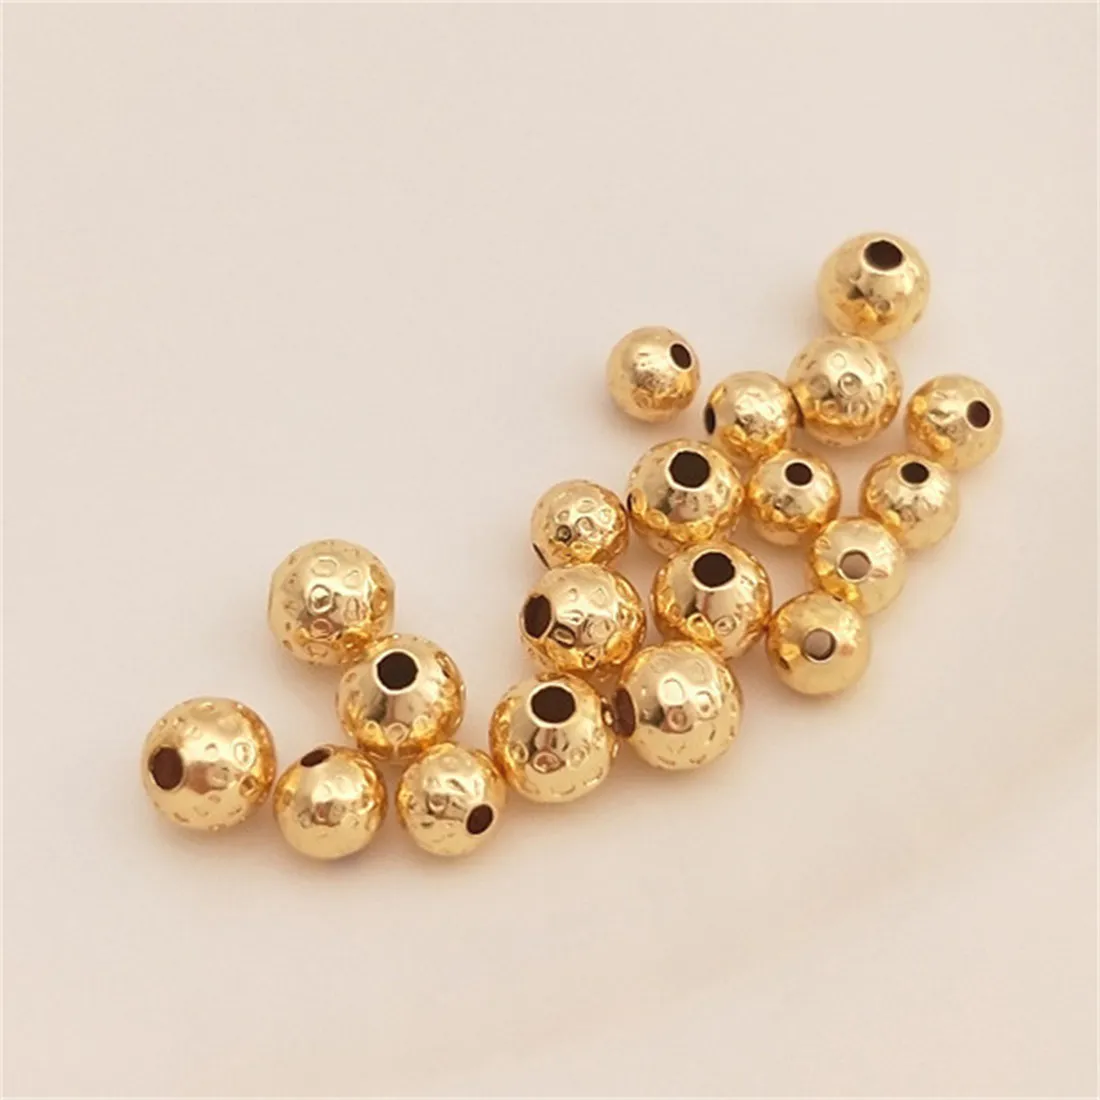 Patterned Beads 14K Gold-coated Embossed Beads Scattered Beads Handmade Diy Beaded Bracelet Bead Jewelry with Bead Materials 14k gold wrapped double sided embossed flat split bead sun circular cake diy chain ear jewelry accessories materials